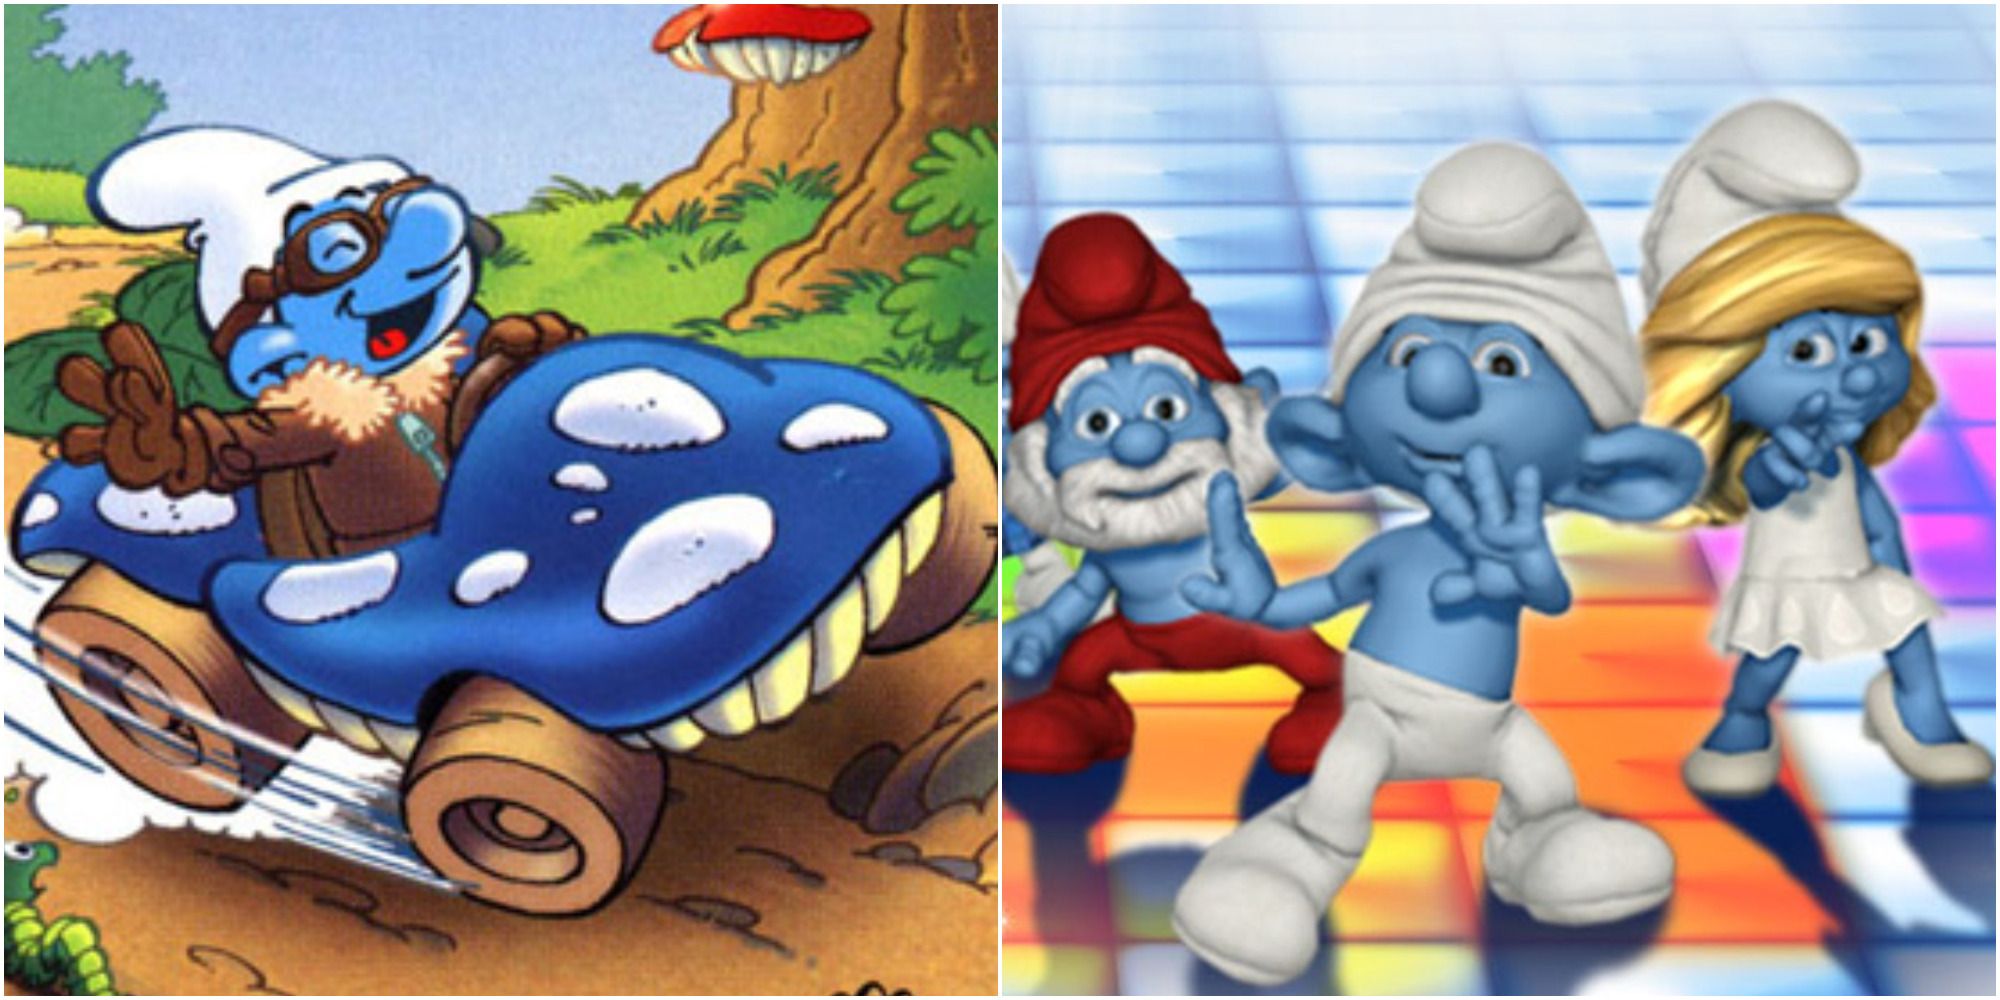 What Is a Smurf in Gaming?